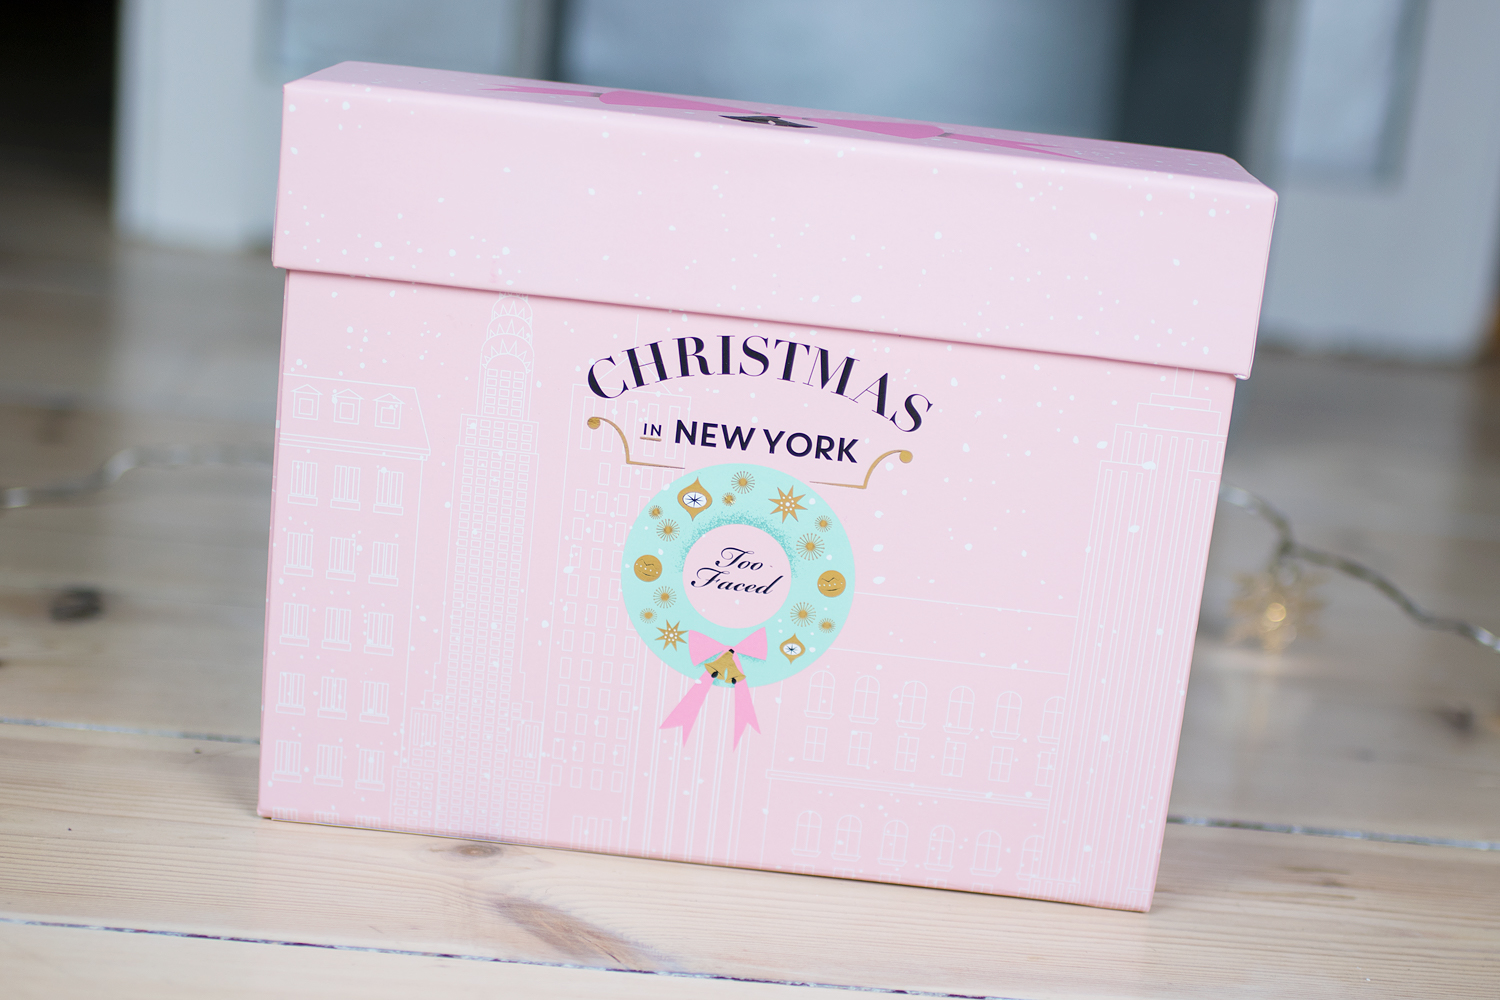 too faced christmas in new york chocolate shop